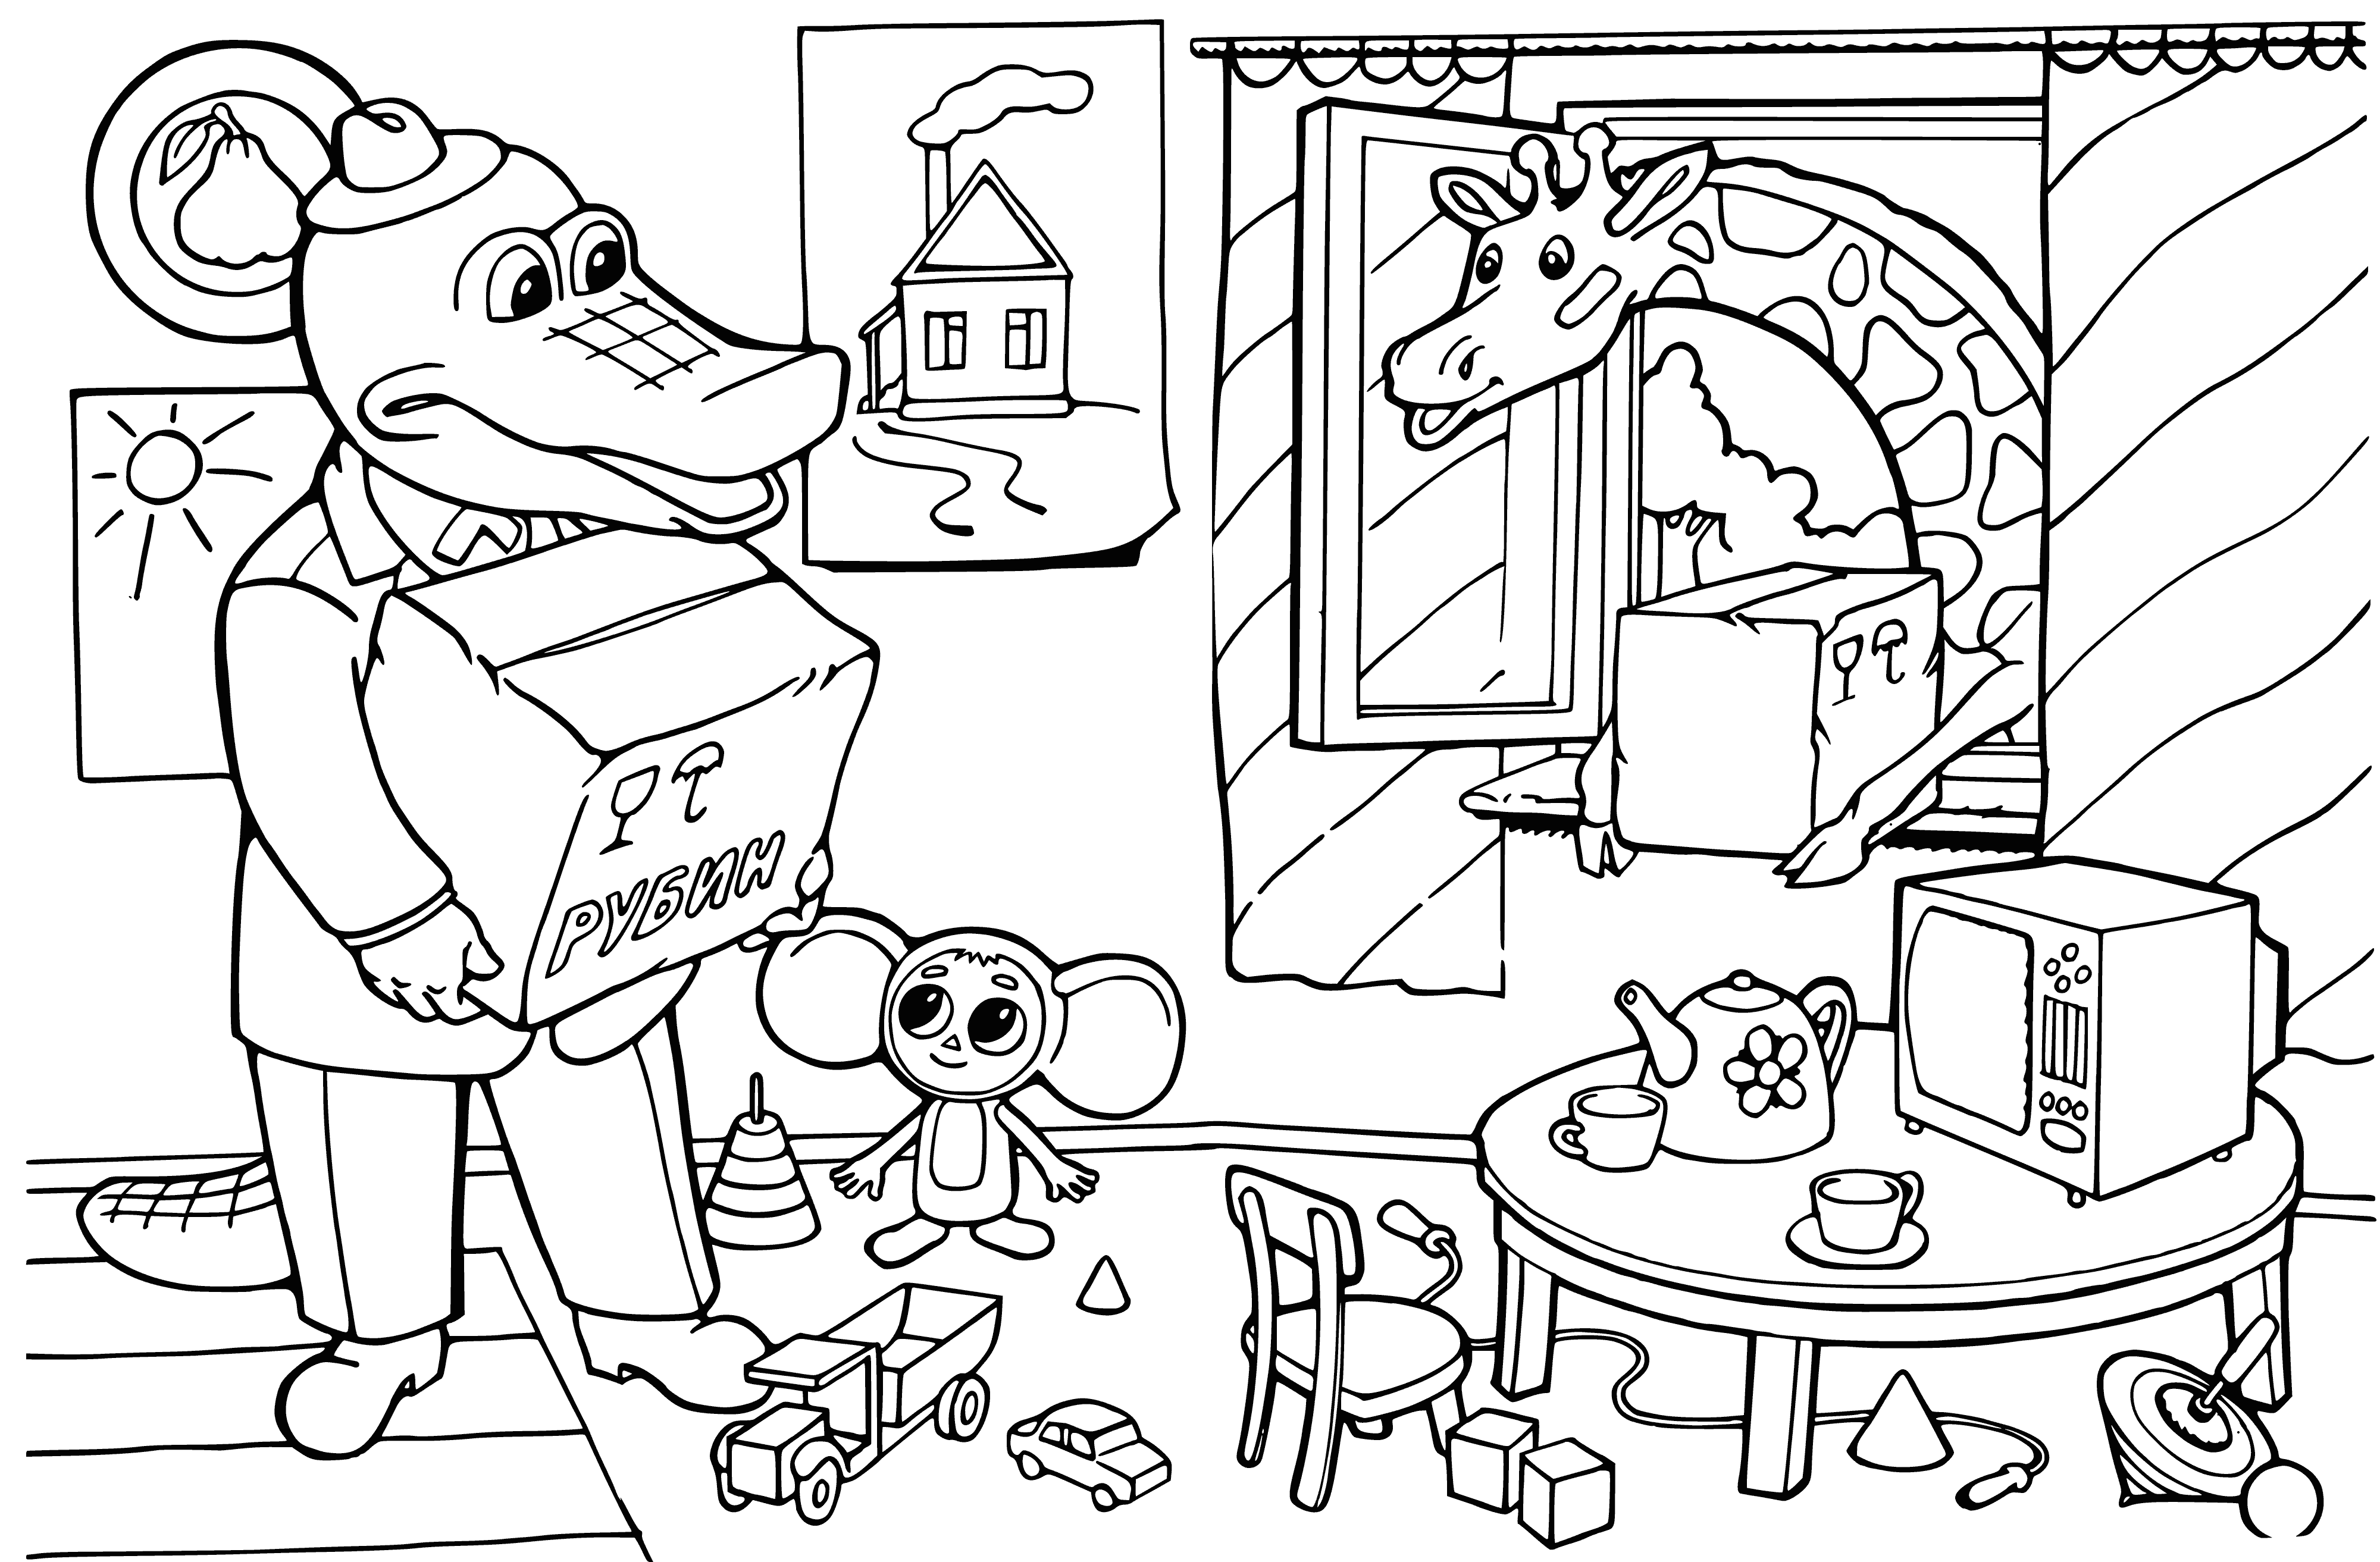 coloring page: Gena the crocodile holds a ball in his mouth with Cheburashka standing on top and Shapoklyak the giraffe nearby.